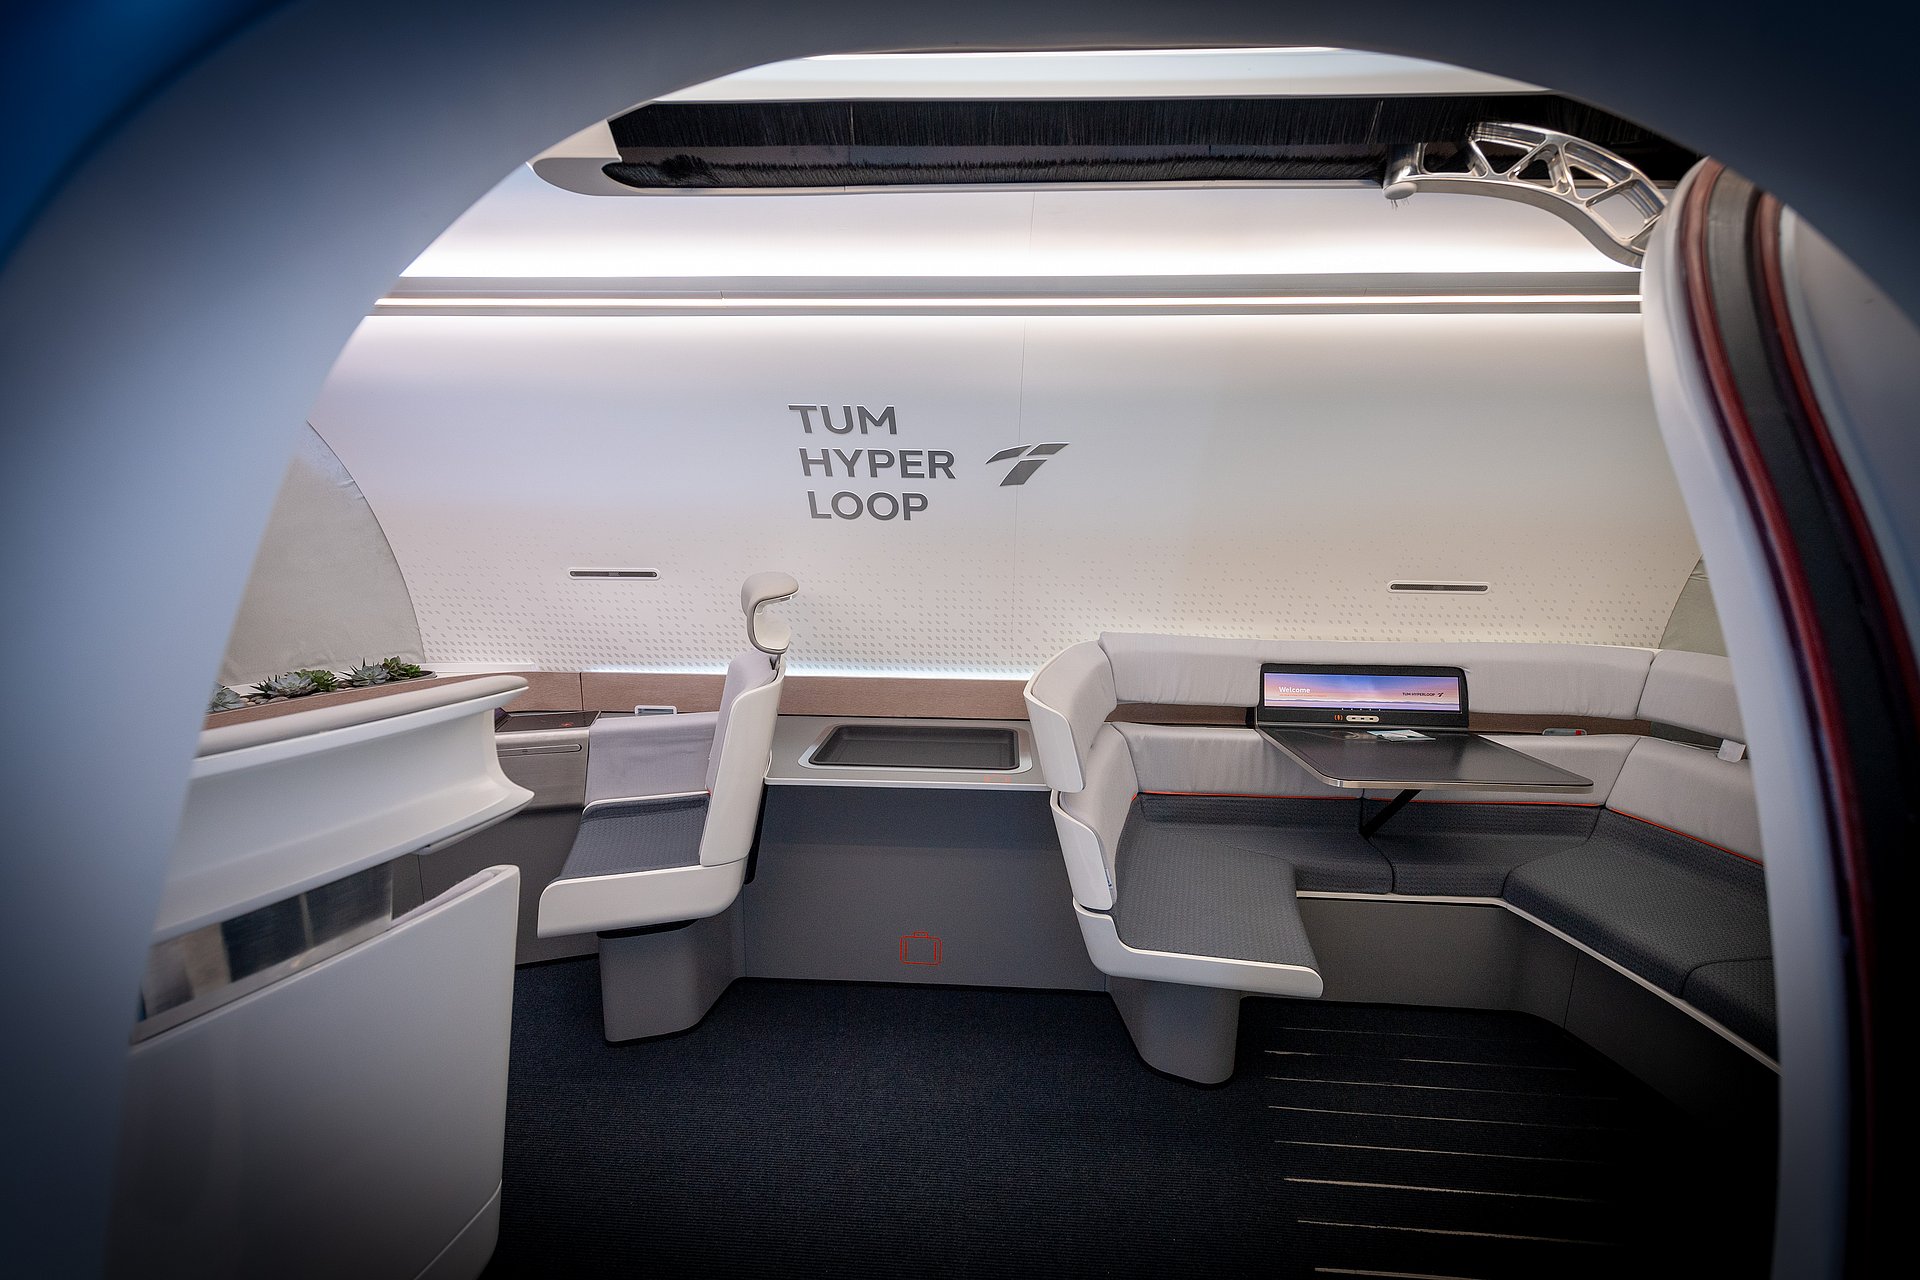 The interior of the Hyperloop capsule makes a cozy impression with lounge character due to bright colors.